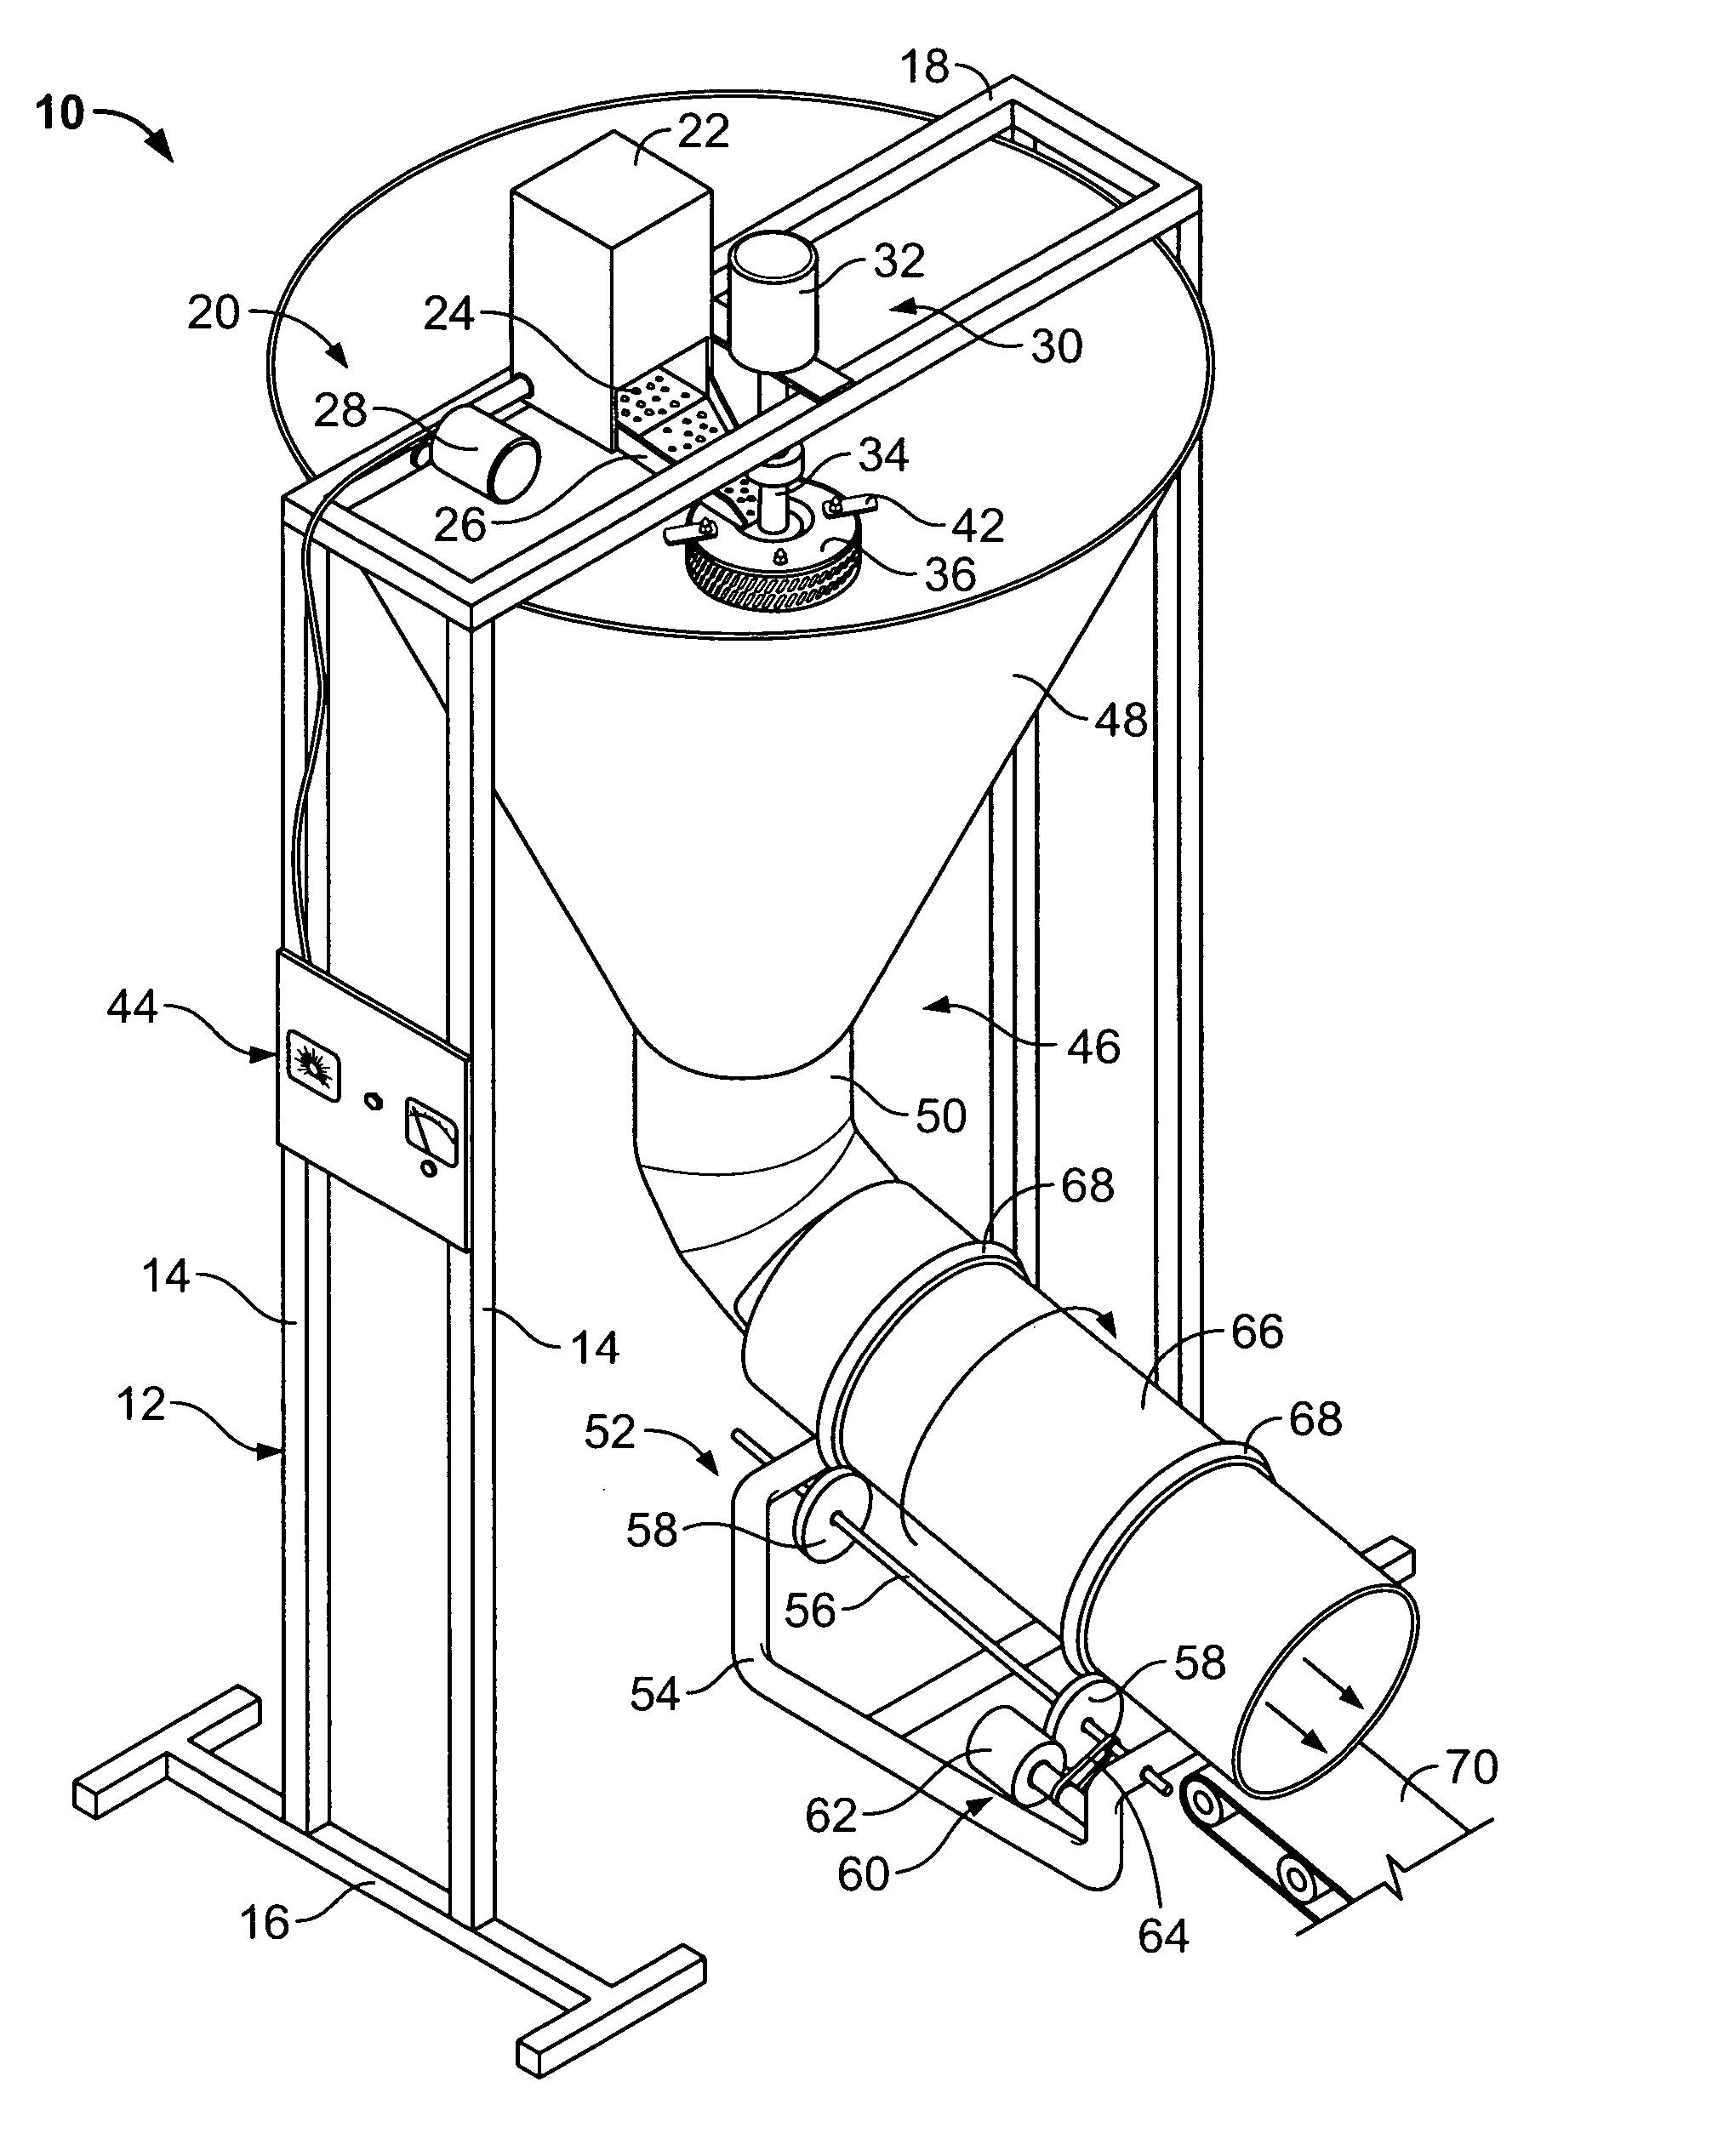 Cotton candy handling device